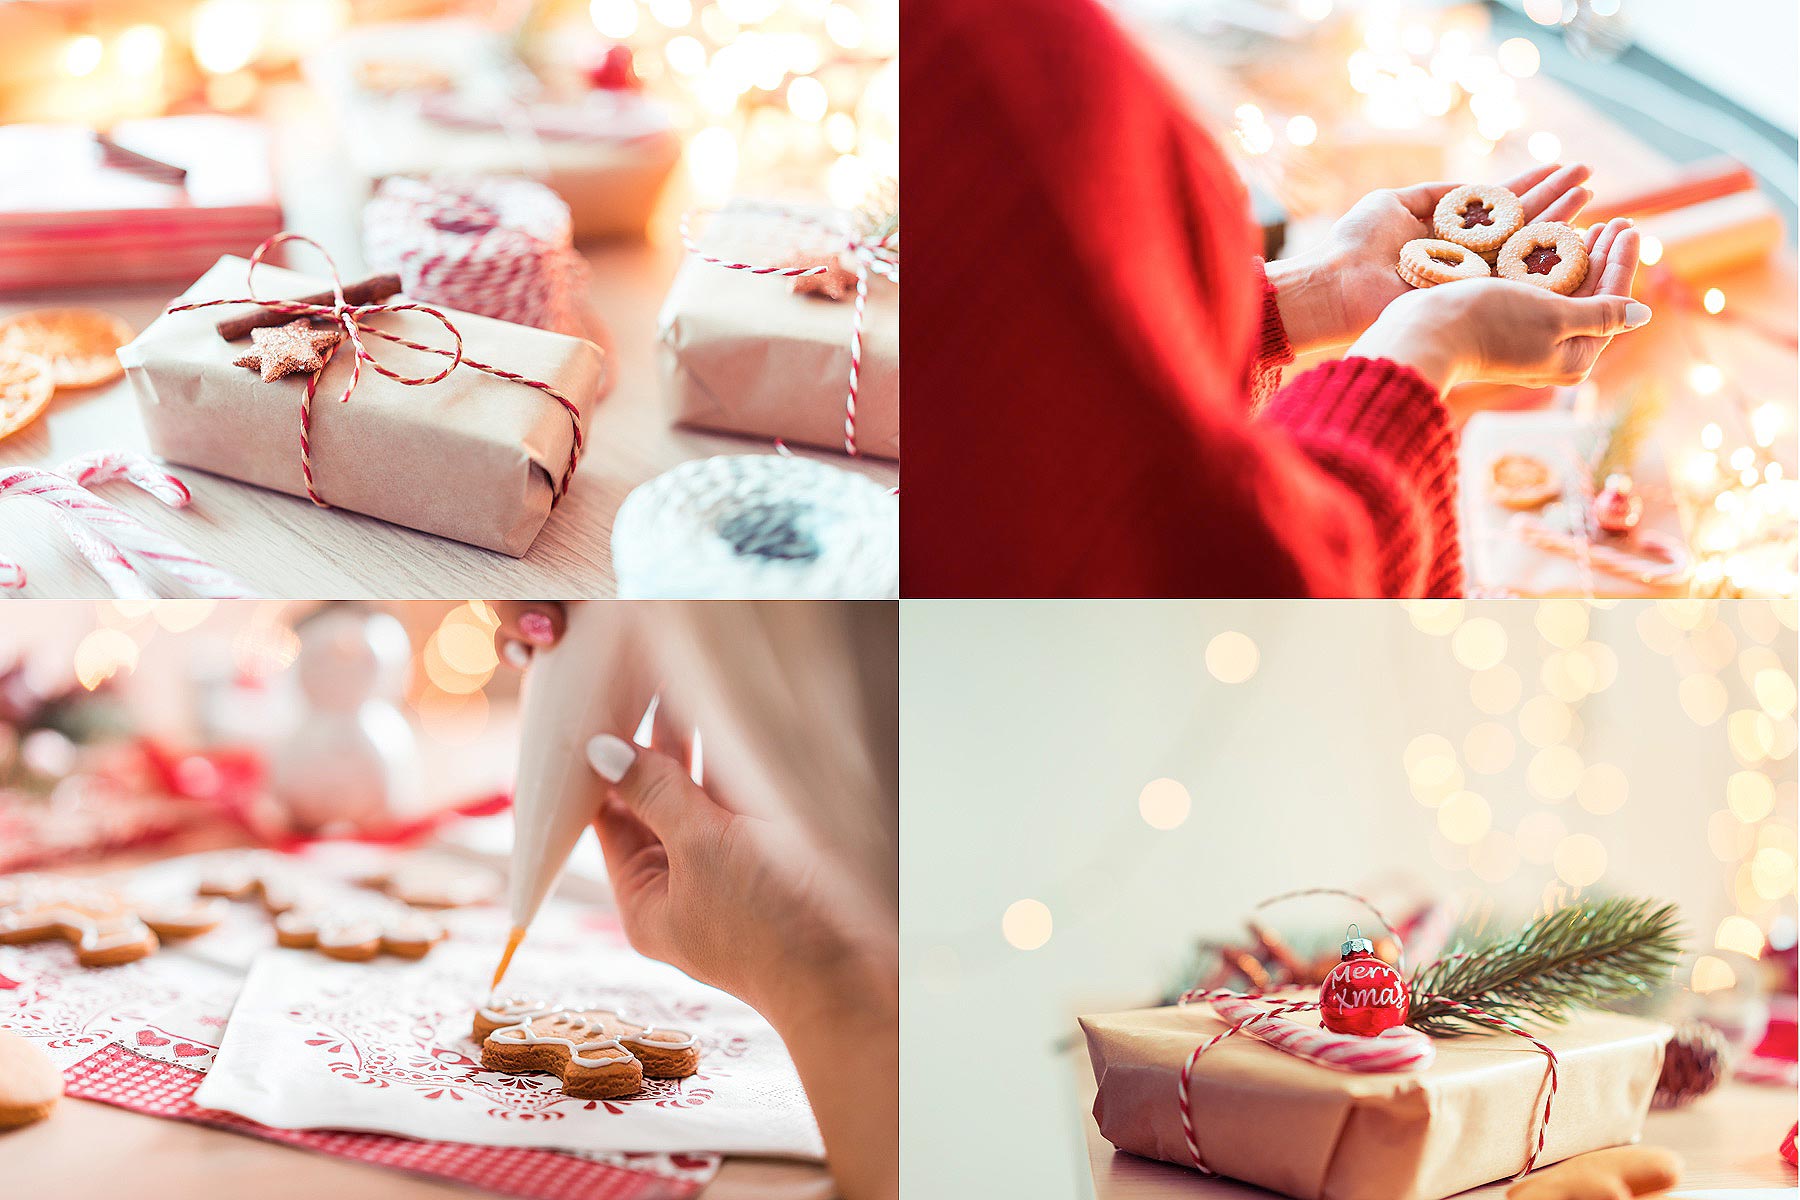 Download 59 photos: Christmas presents, wrapping, decorations and more!